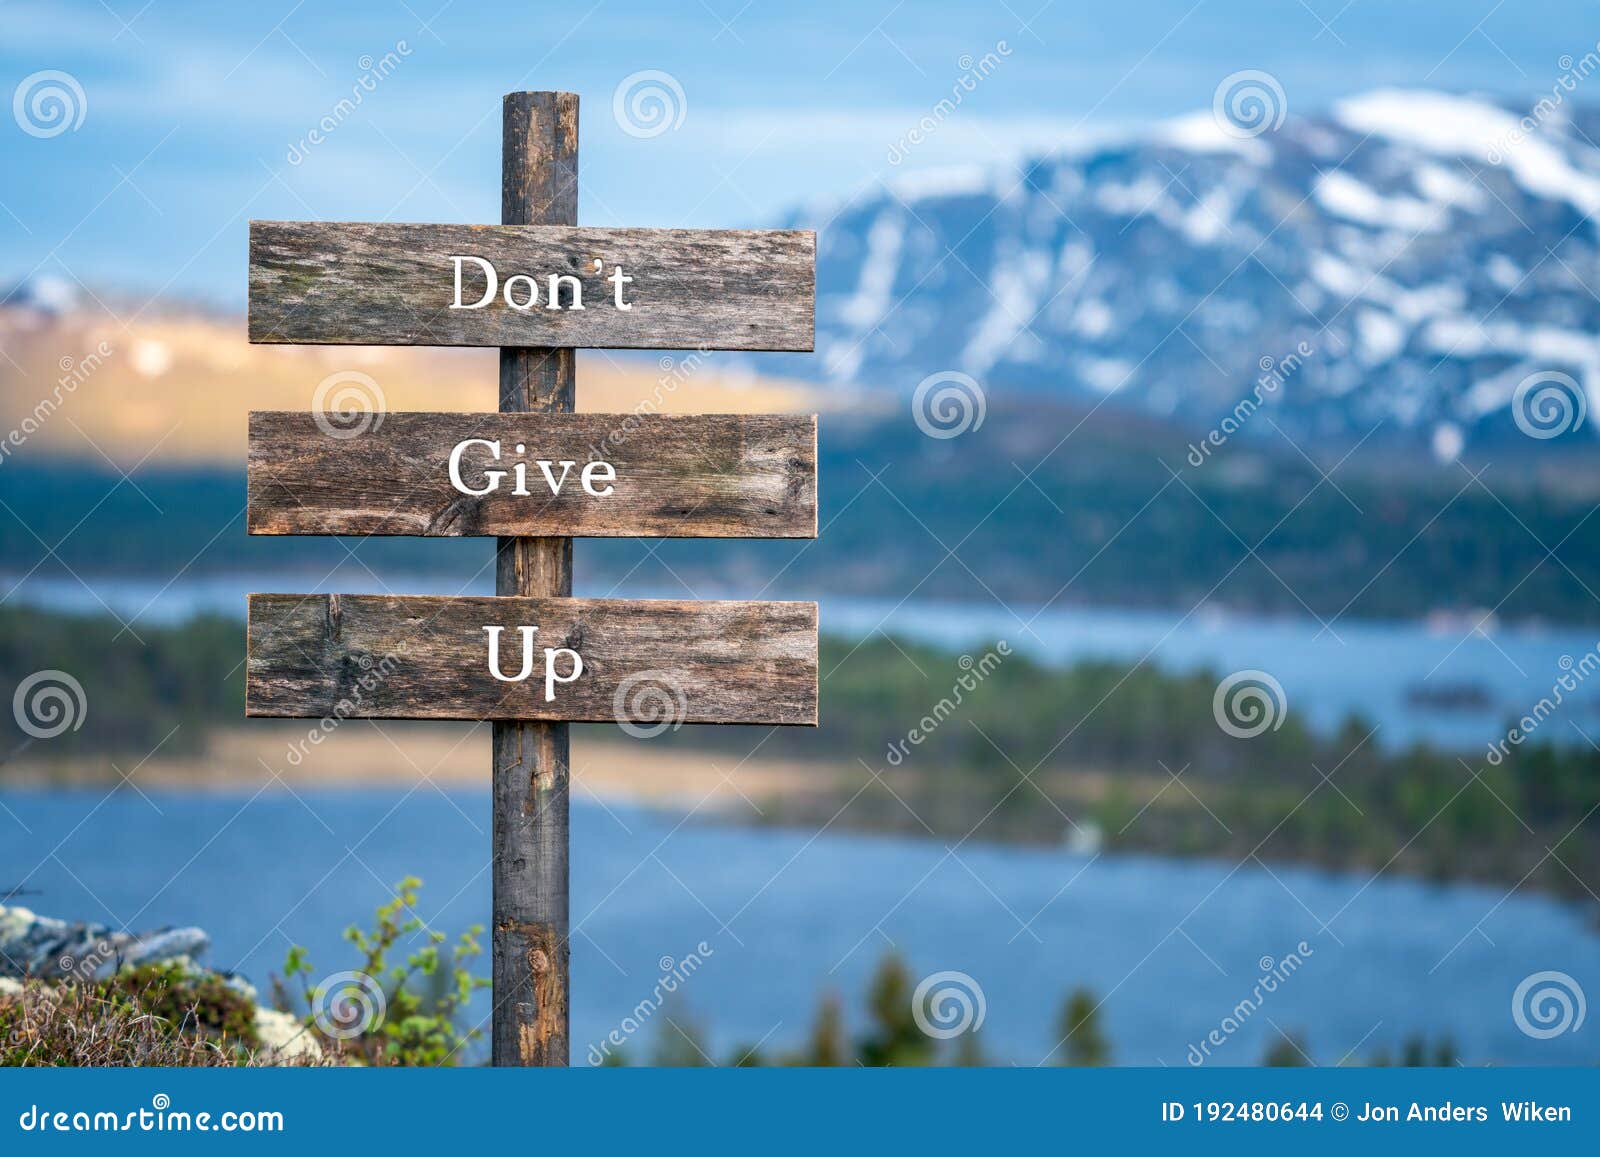 dont give up text on wooden signpost outdoors in landscape scenery during blue hour.